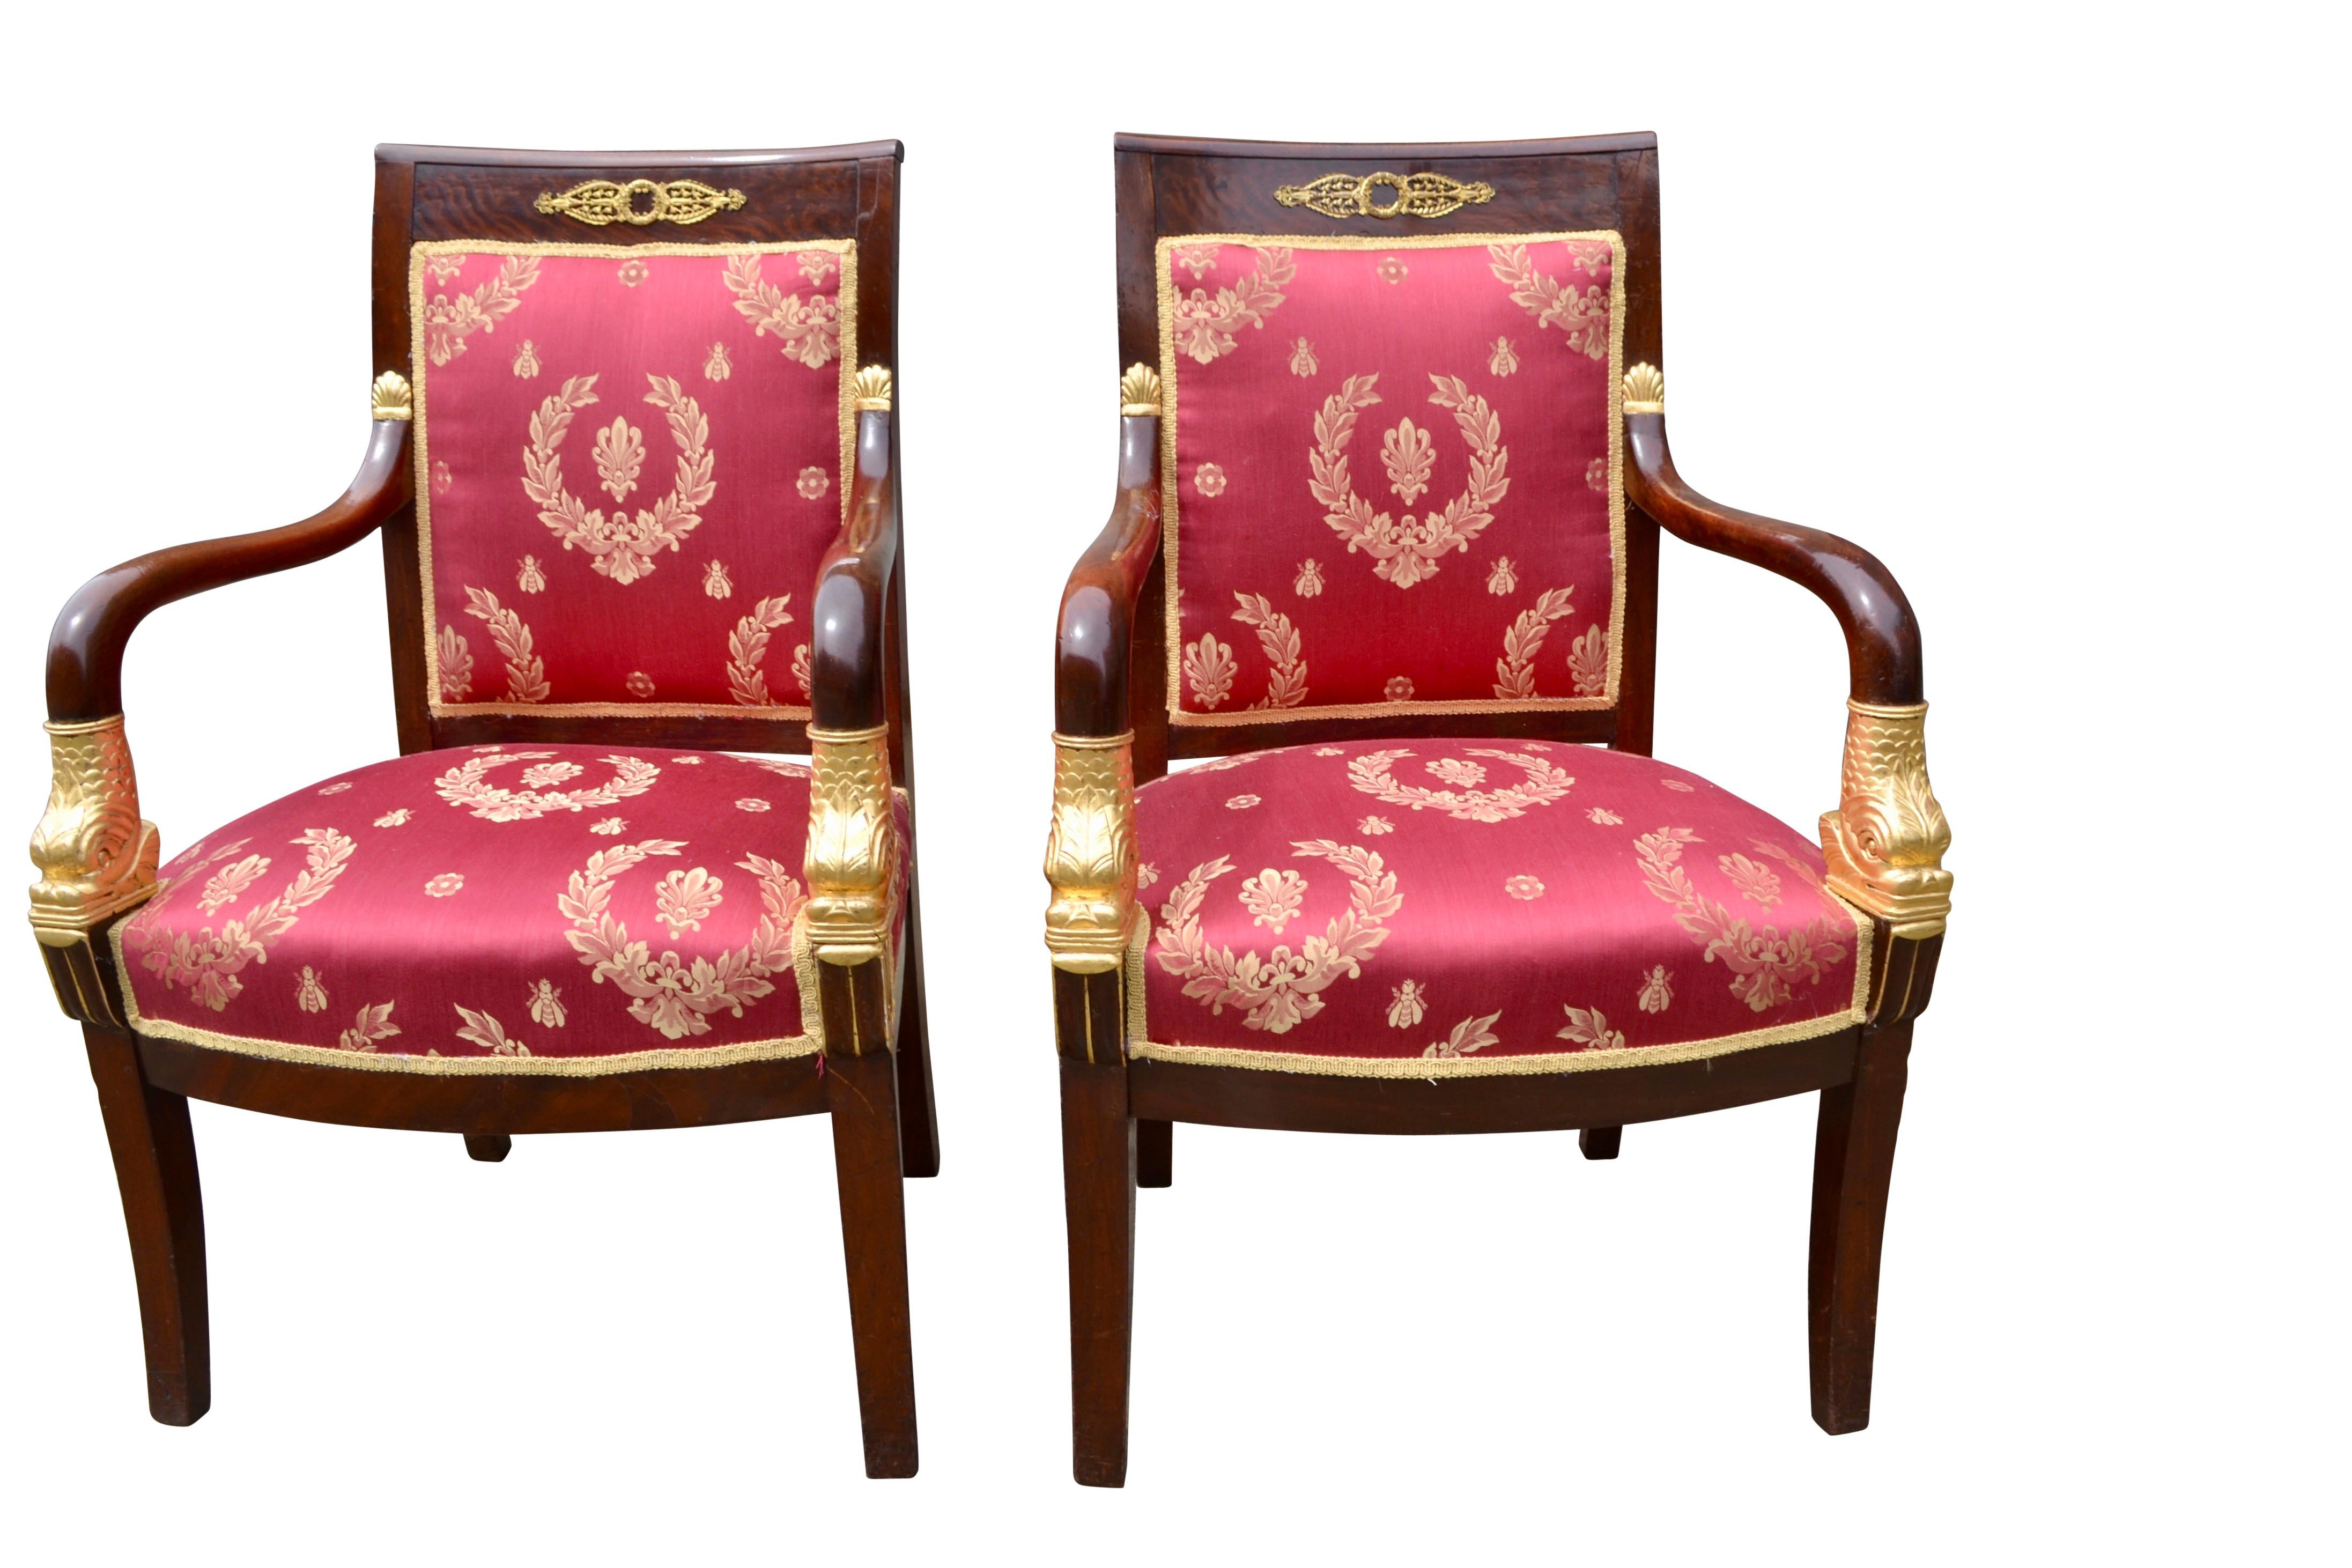 A fine pair of period French Empire arm chairs. The mahogany frames are accented with gilded bronze mounts but most strikingly the swept open arms terminate in beautifully carved gilded wood dolphins. The top of the arms joining the square backs